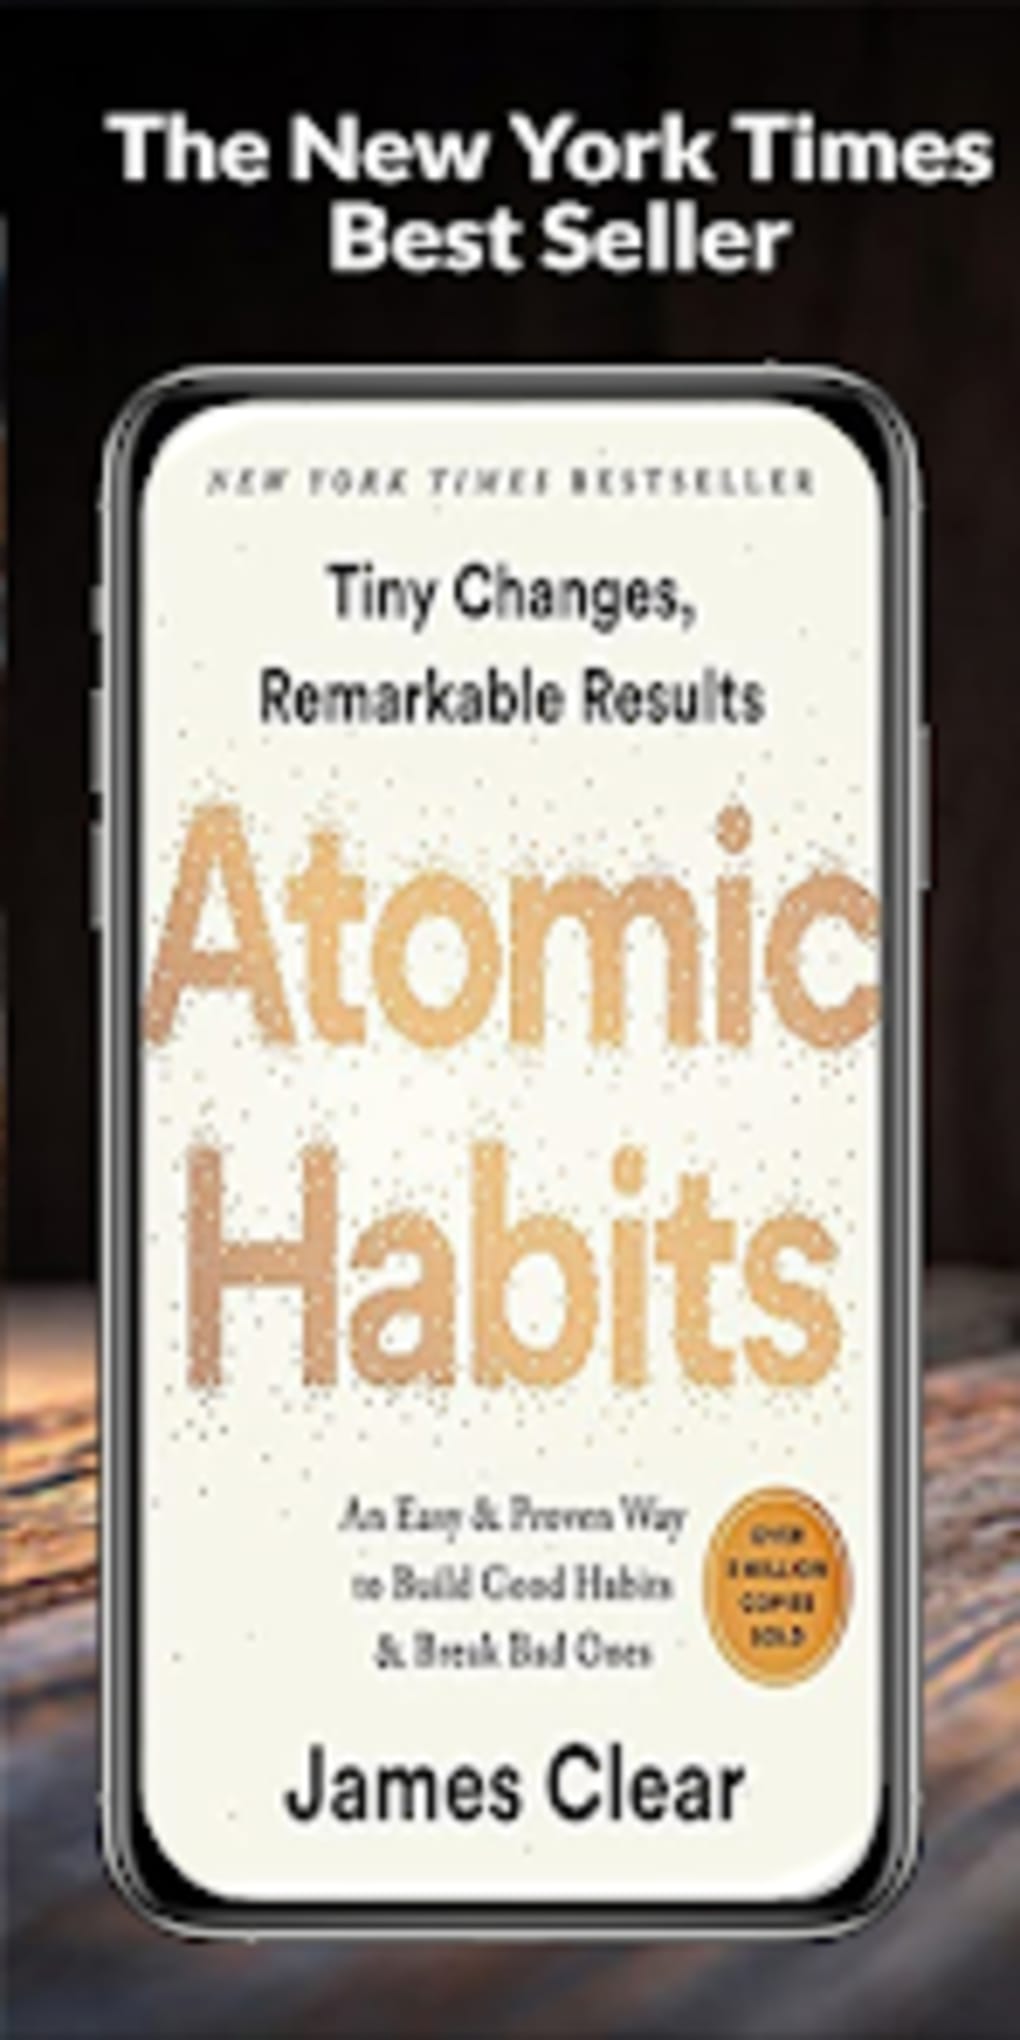 Atomic Habits download the last version for android